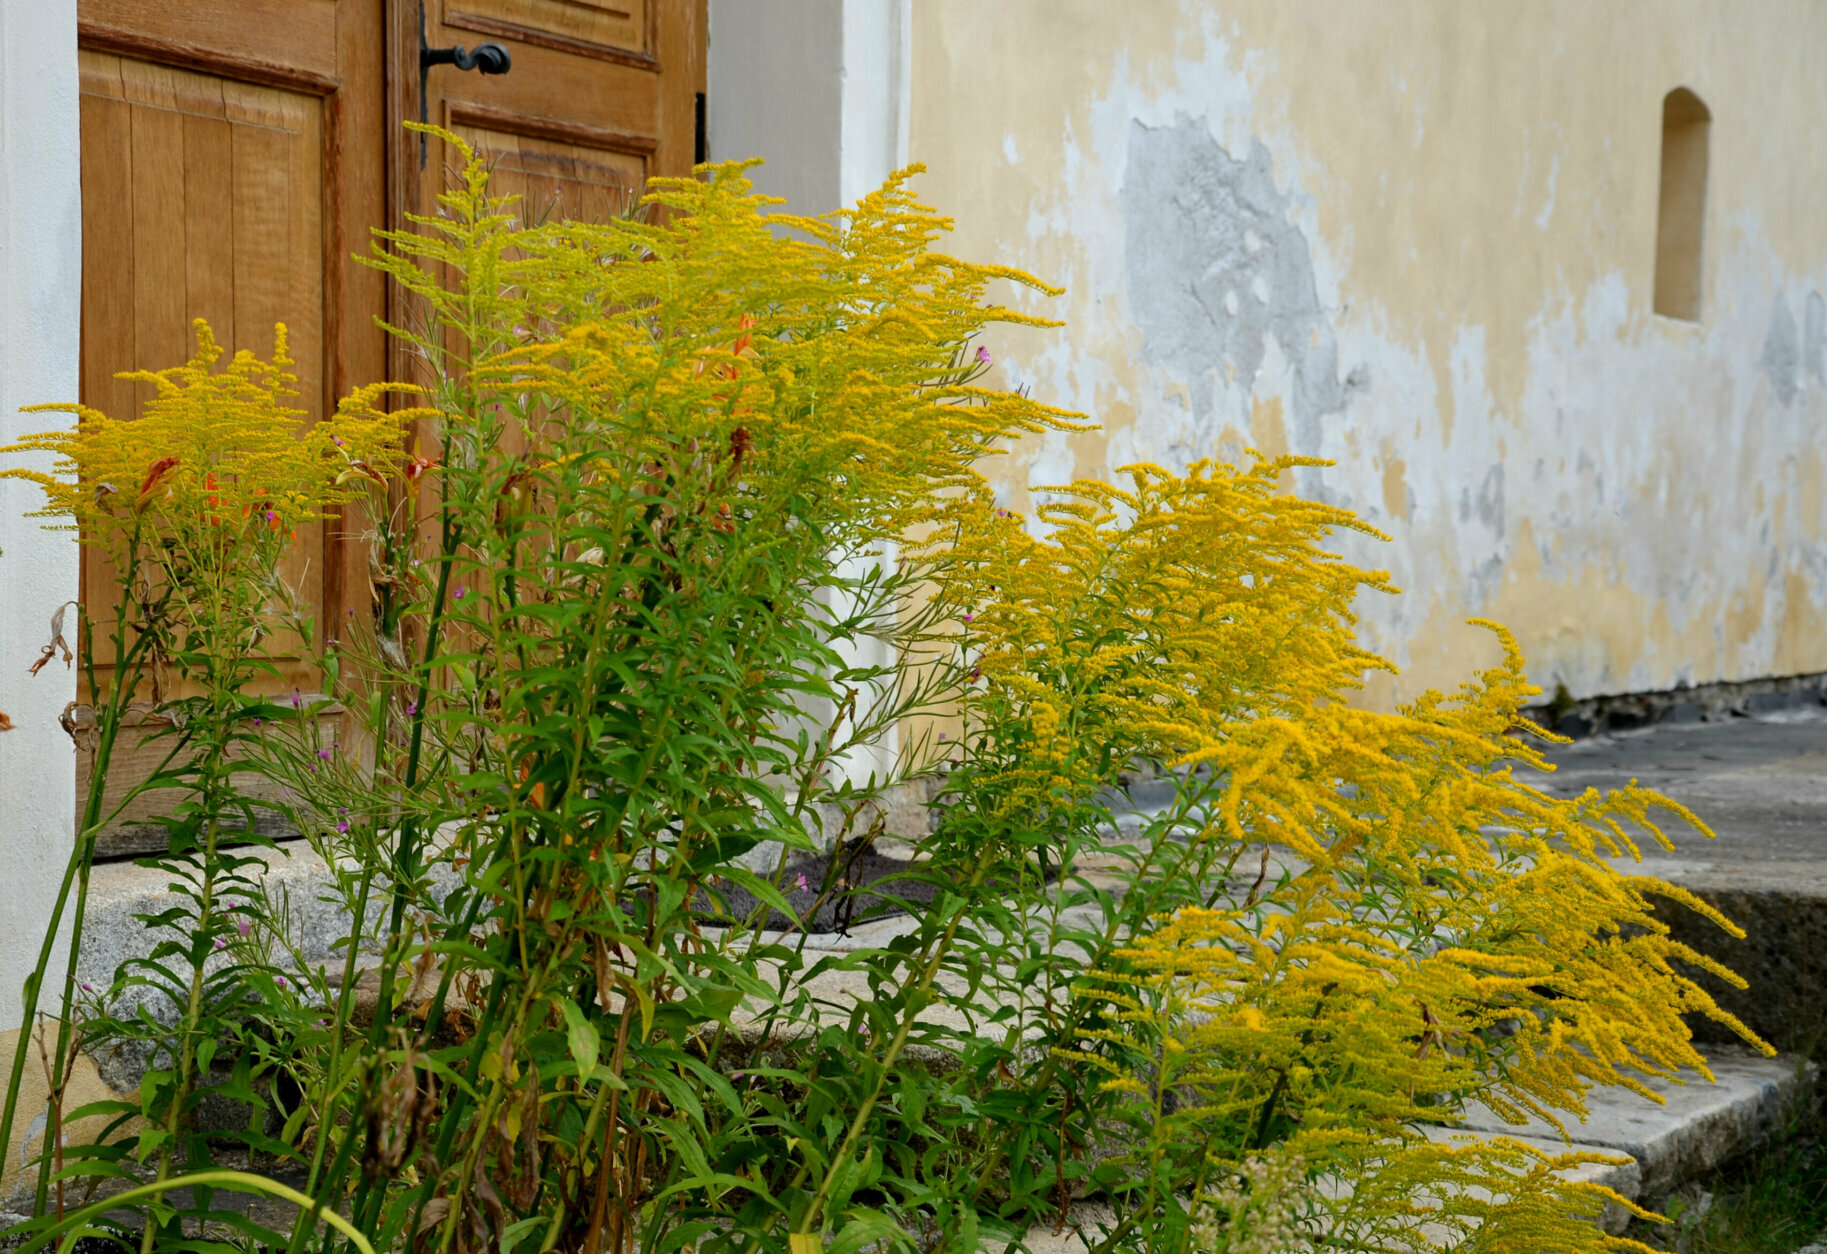 solidago, gigantea, canadensis, invasive, antropogenic, uncultivated, tall, rumors, coastal, shrubs, railways, roads, along, blooms, yellow, blossom, herb, doors, door, house, beige, wooden, plaster, old, ancient, weed, pretty,